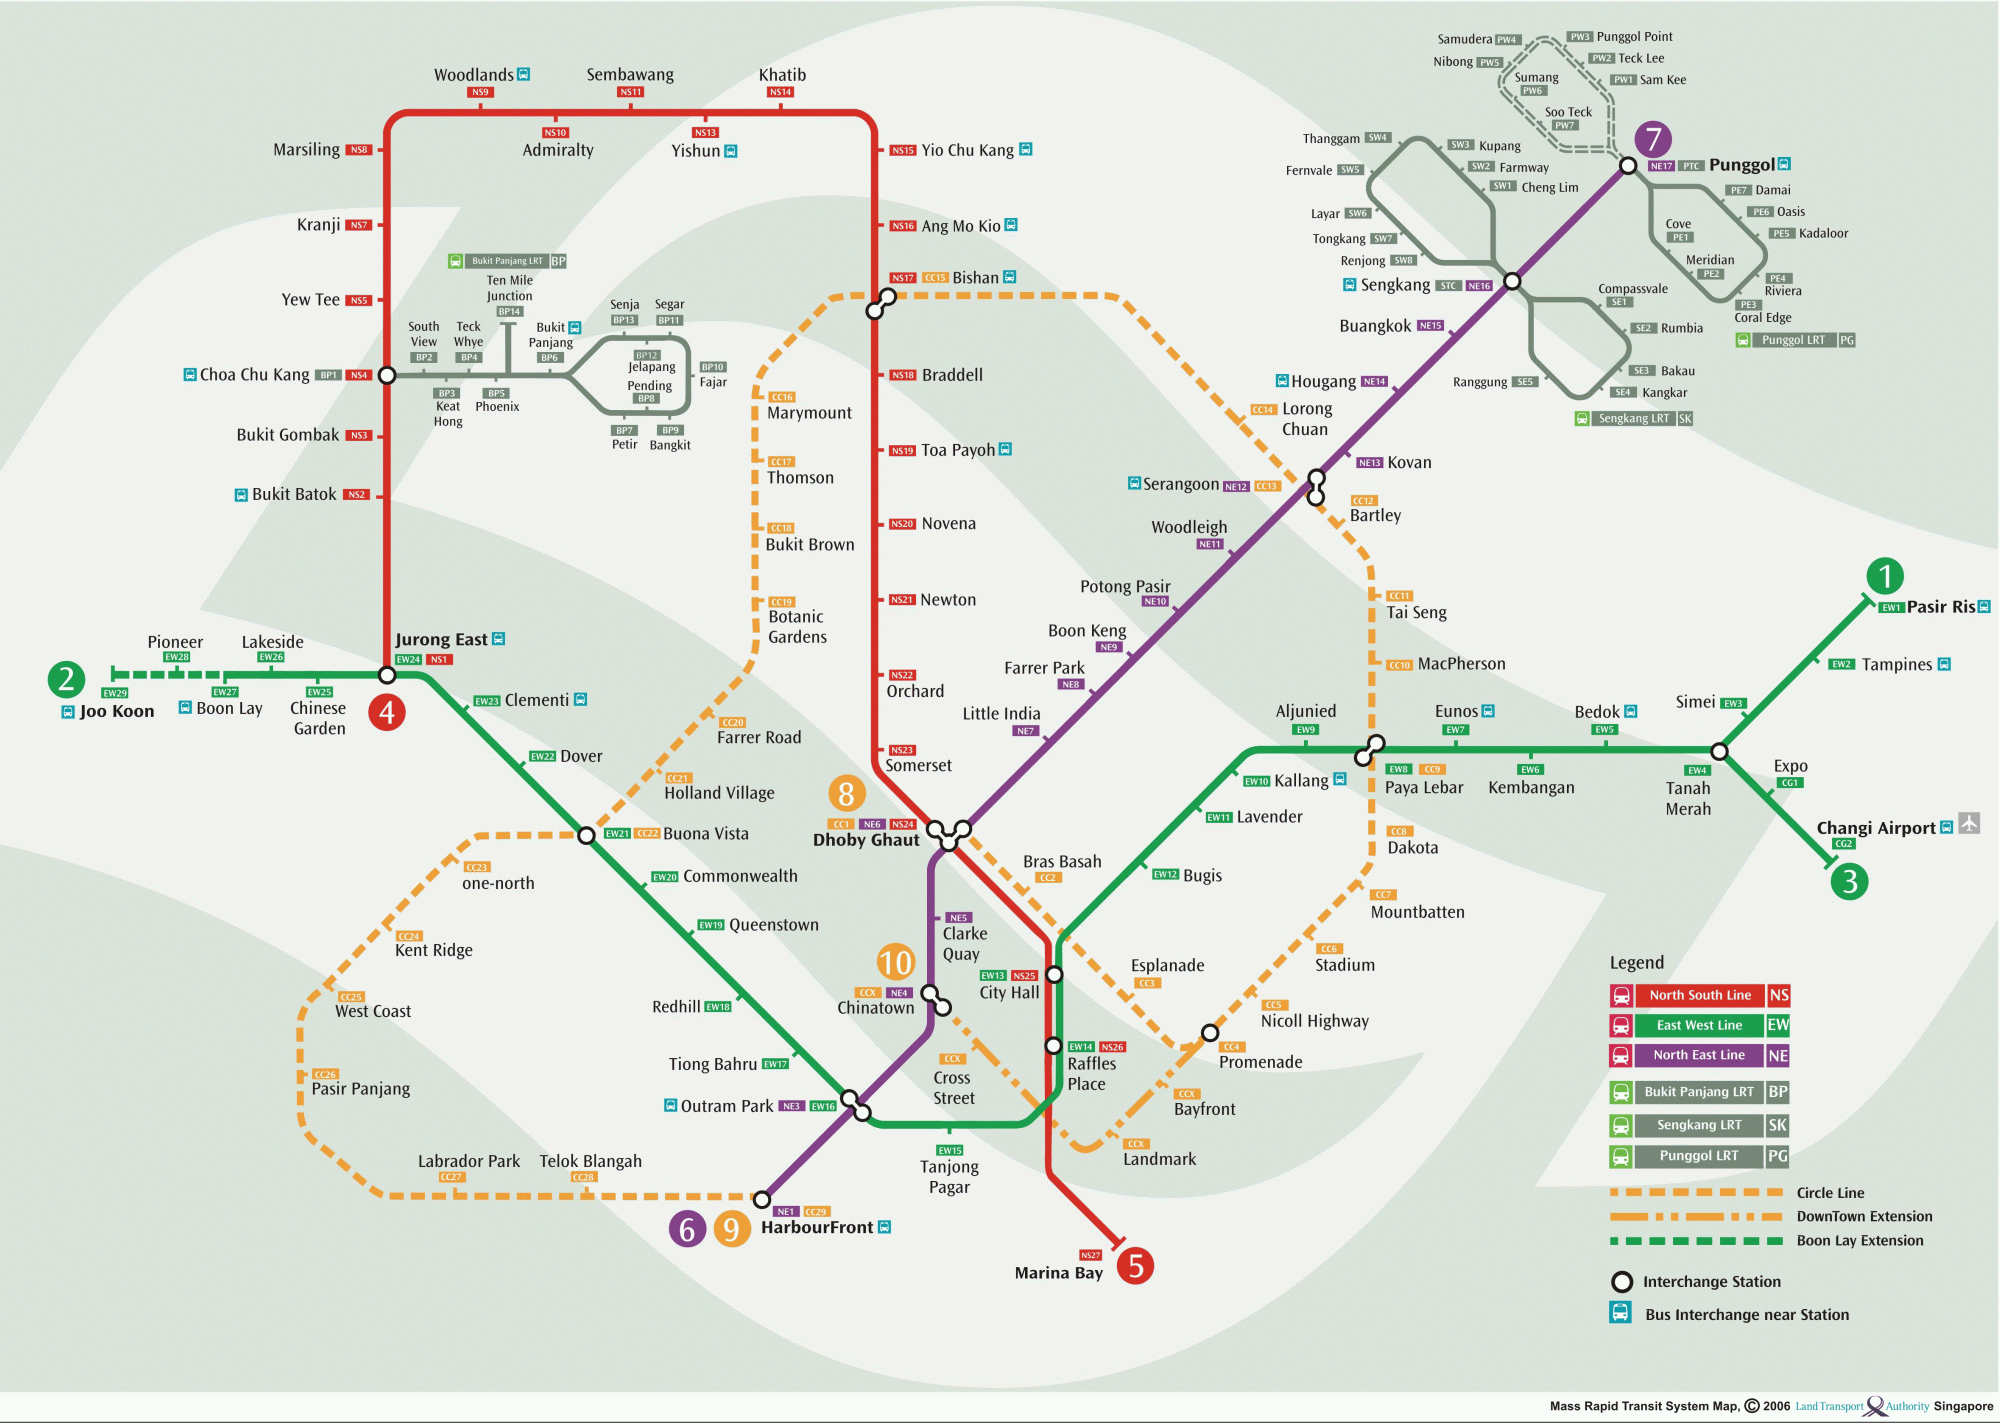 Singapore Metro System Map See map details From lta.gov.sg Created ...